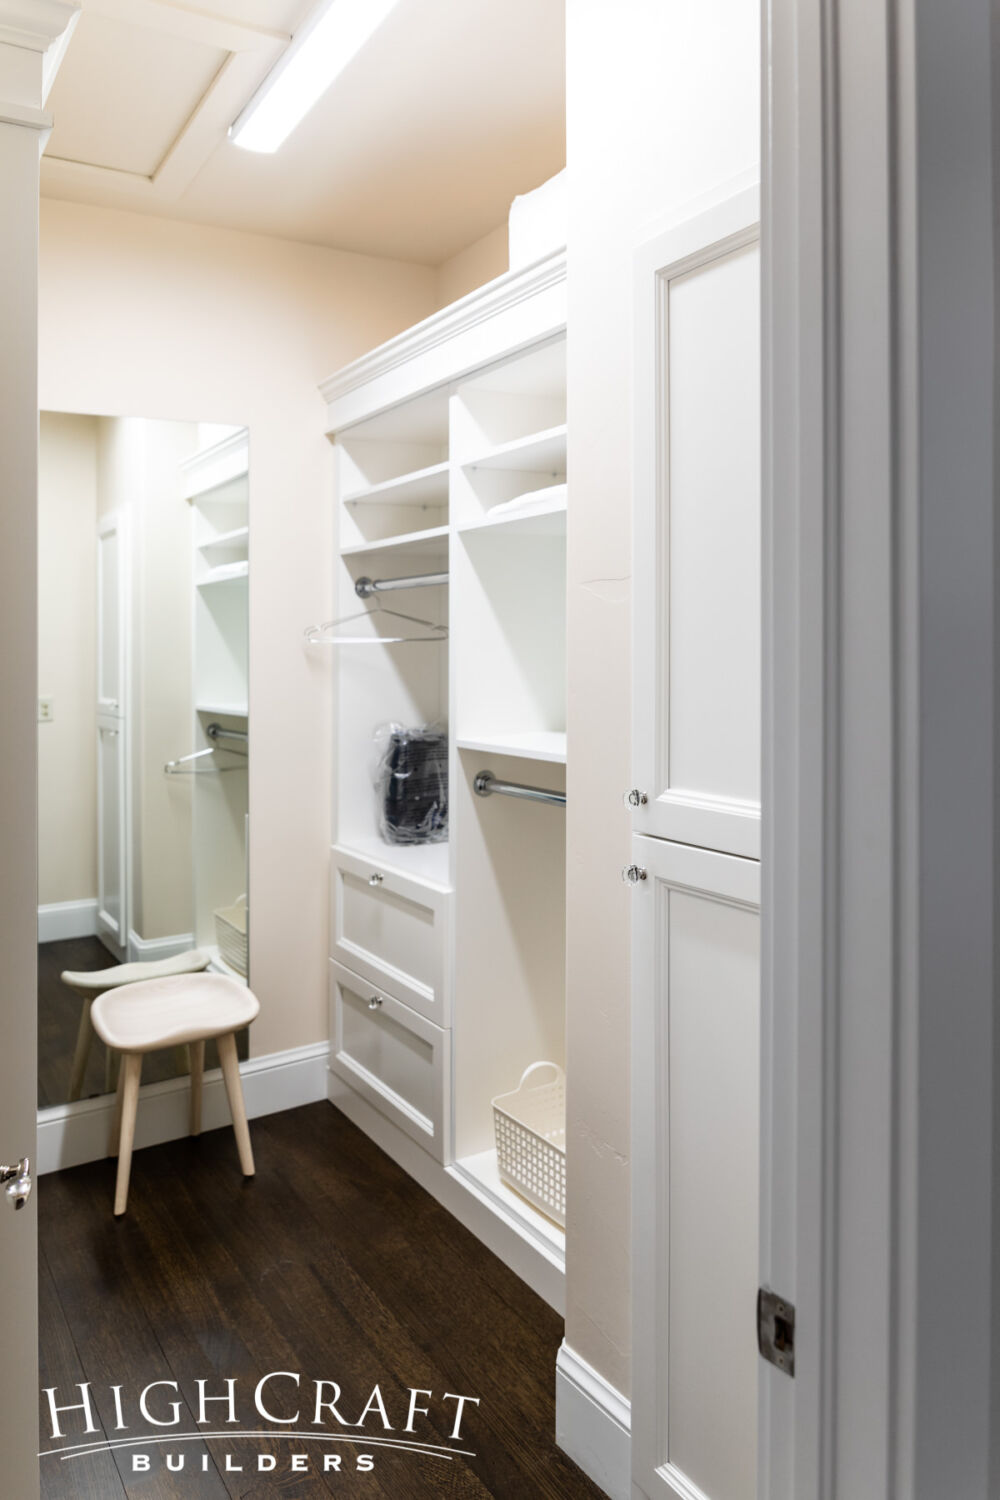 Eclectic-Remodel-in-Old-Town-Master-Suite-Closet-with-Custom-Built-in-Storage